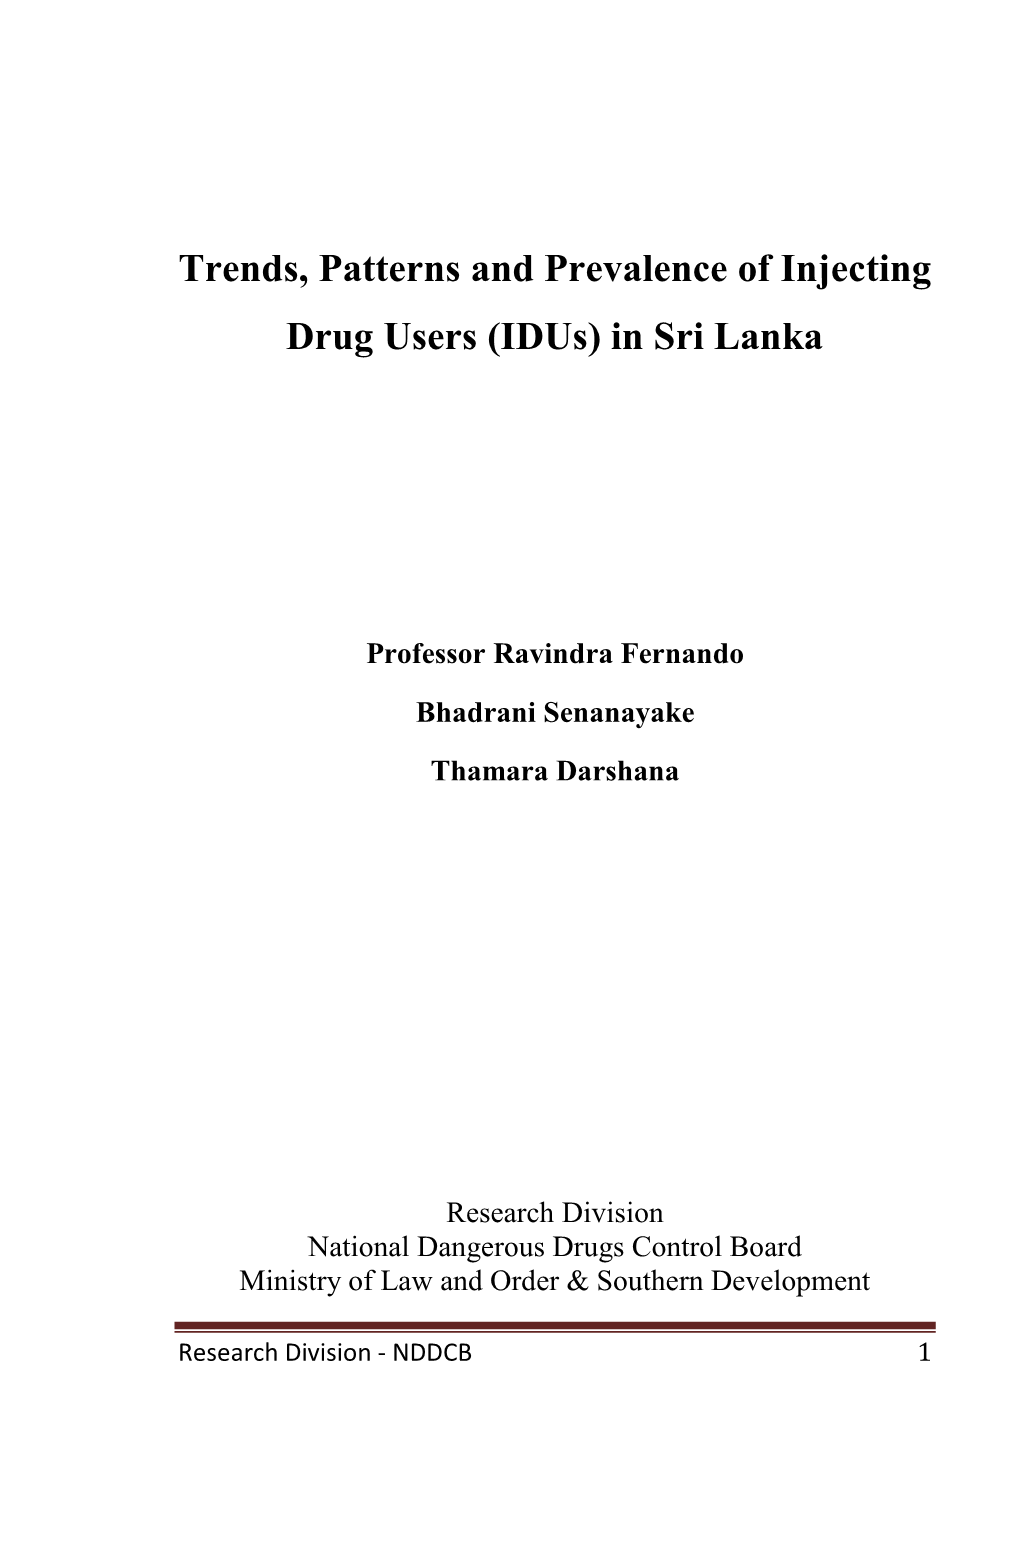 Trends, Patterns and Prevelence of Injecting Drug Users in Sri Lanka